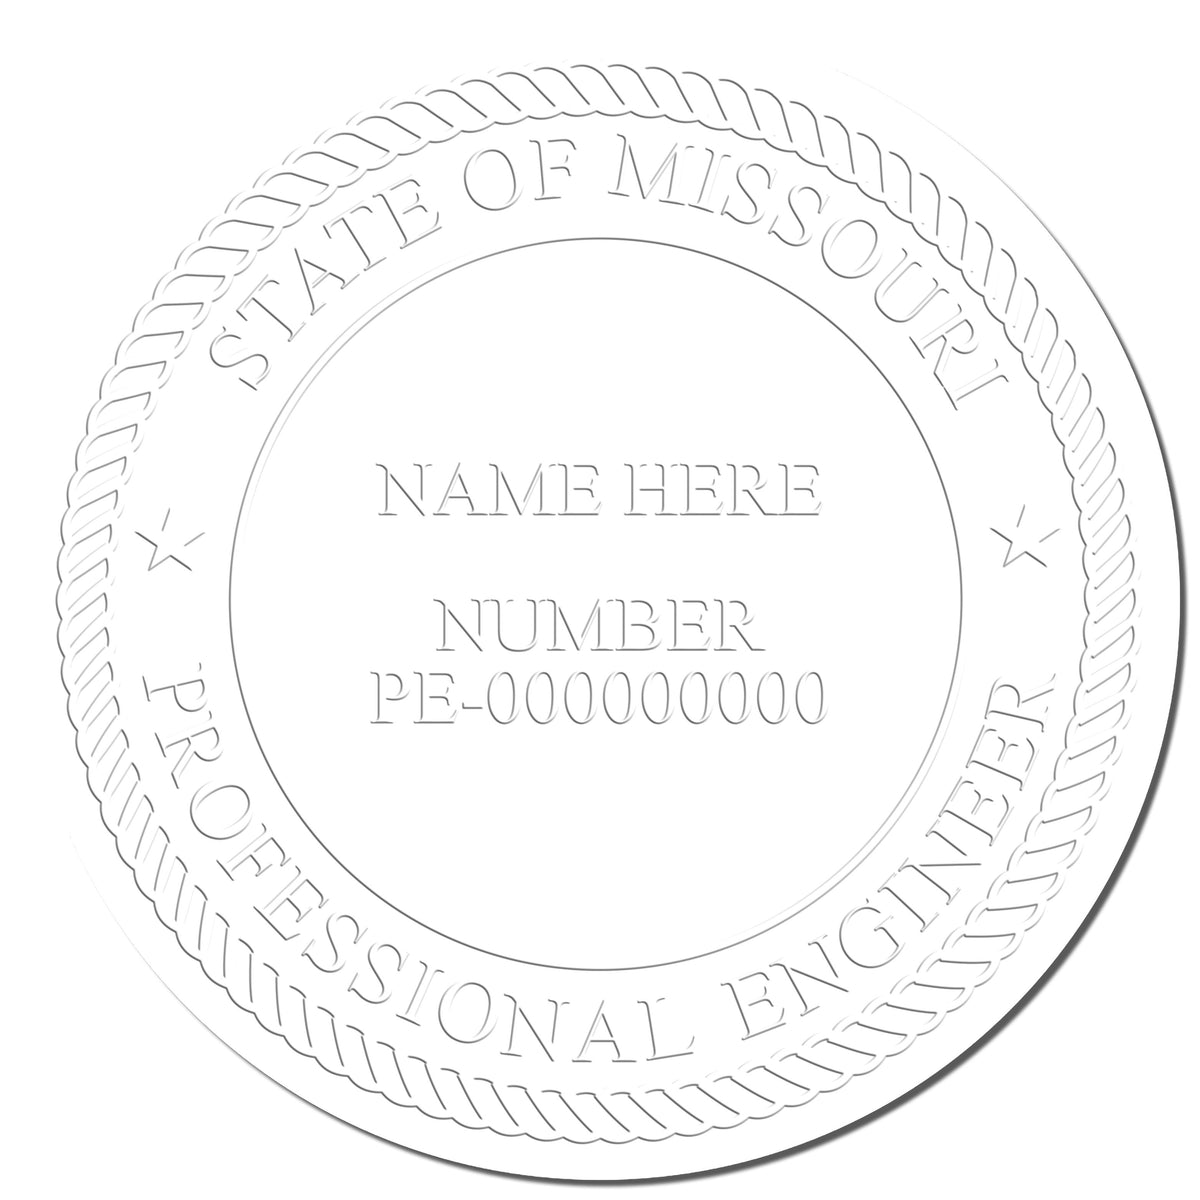 This paper is stamped with a sample imprint of the Heavy Duty Cast Iron Missouri Engineer Seal Embosser, signifying its quality and reliability.